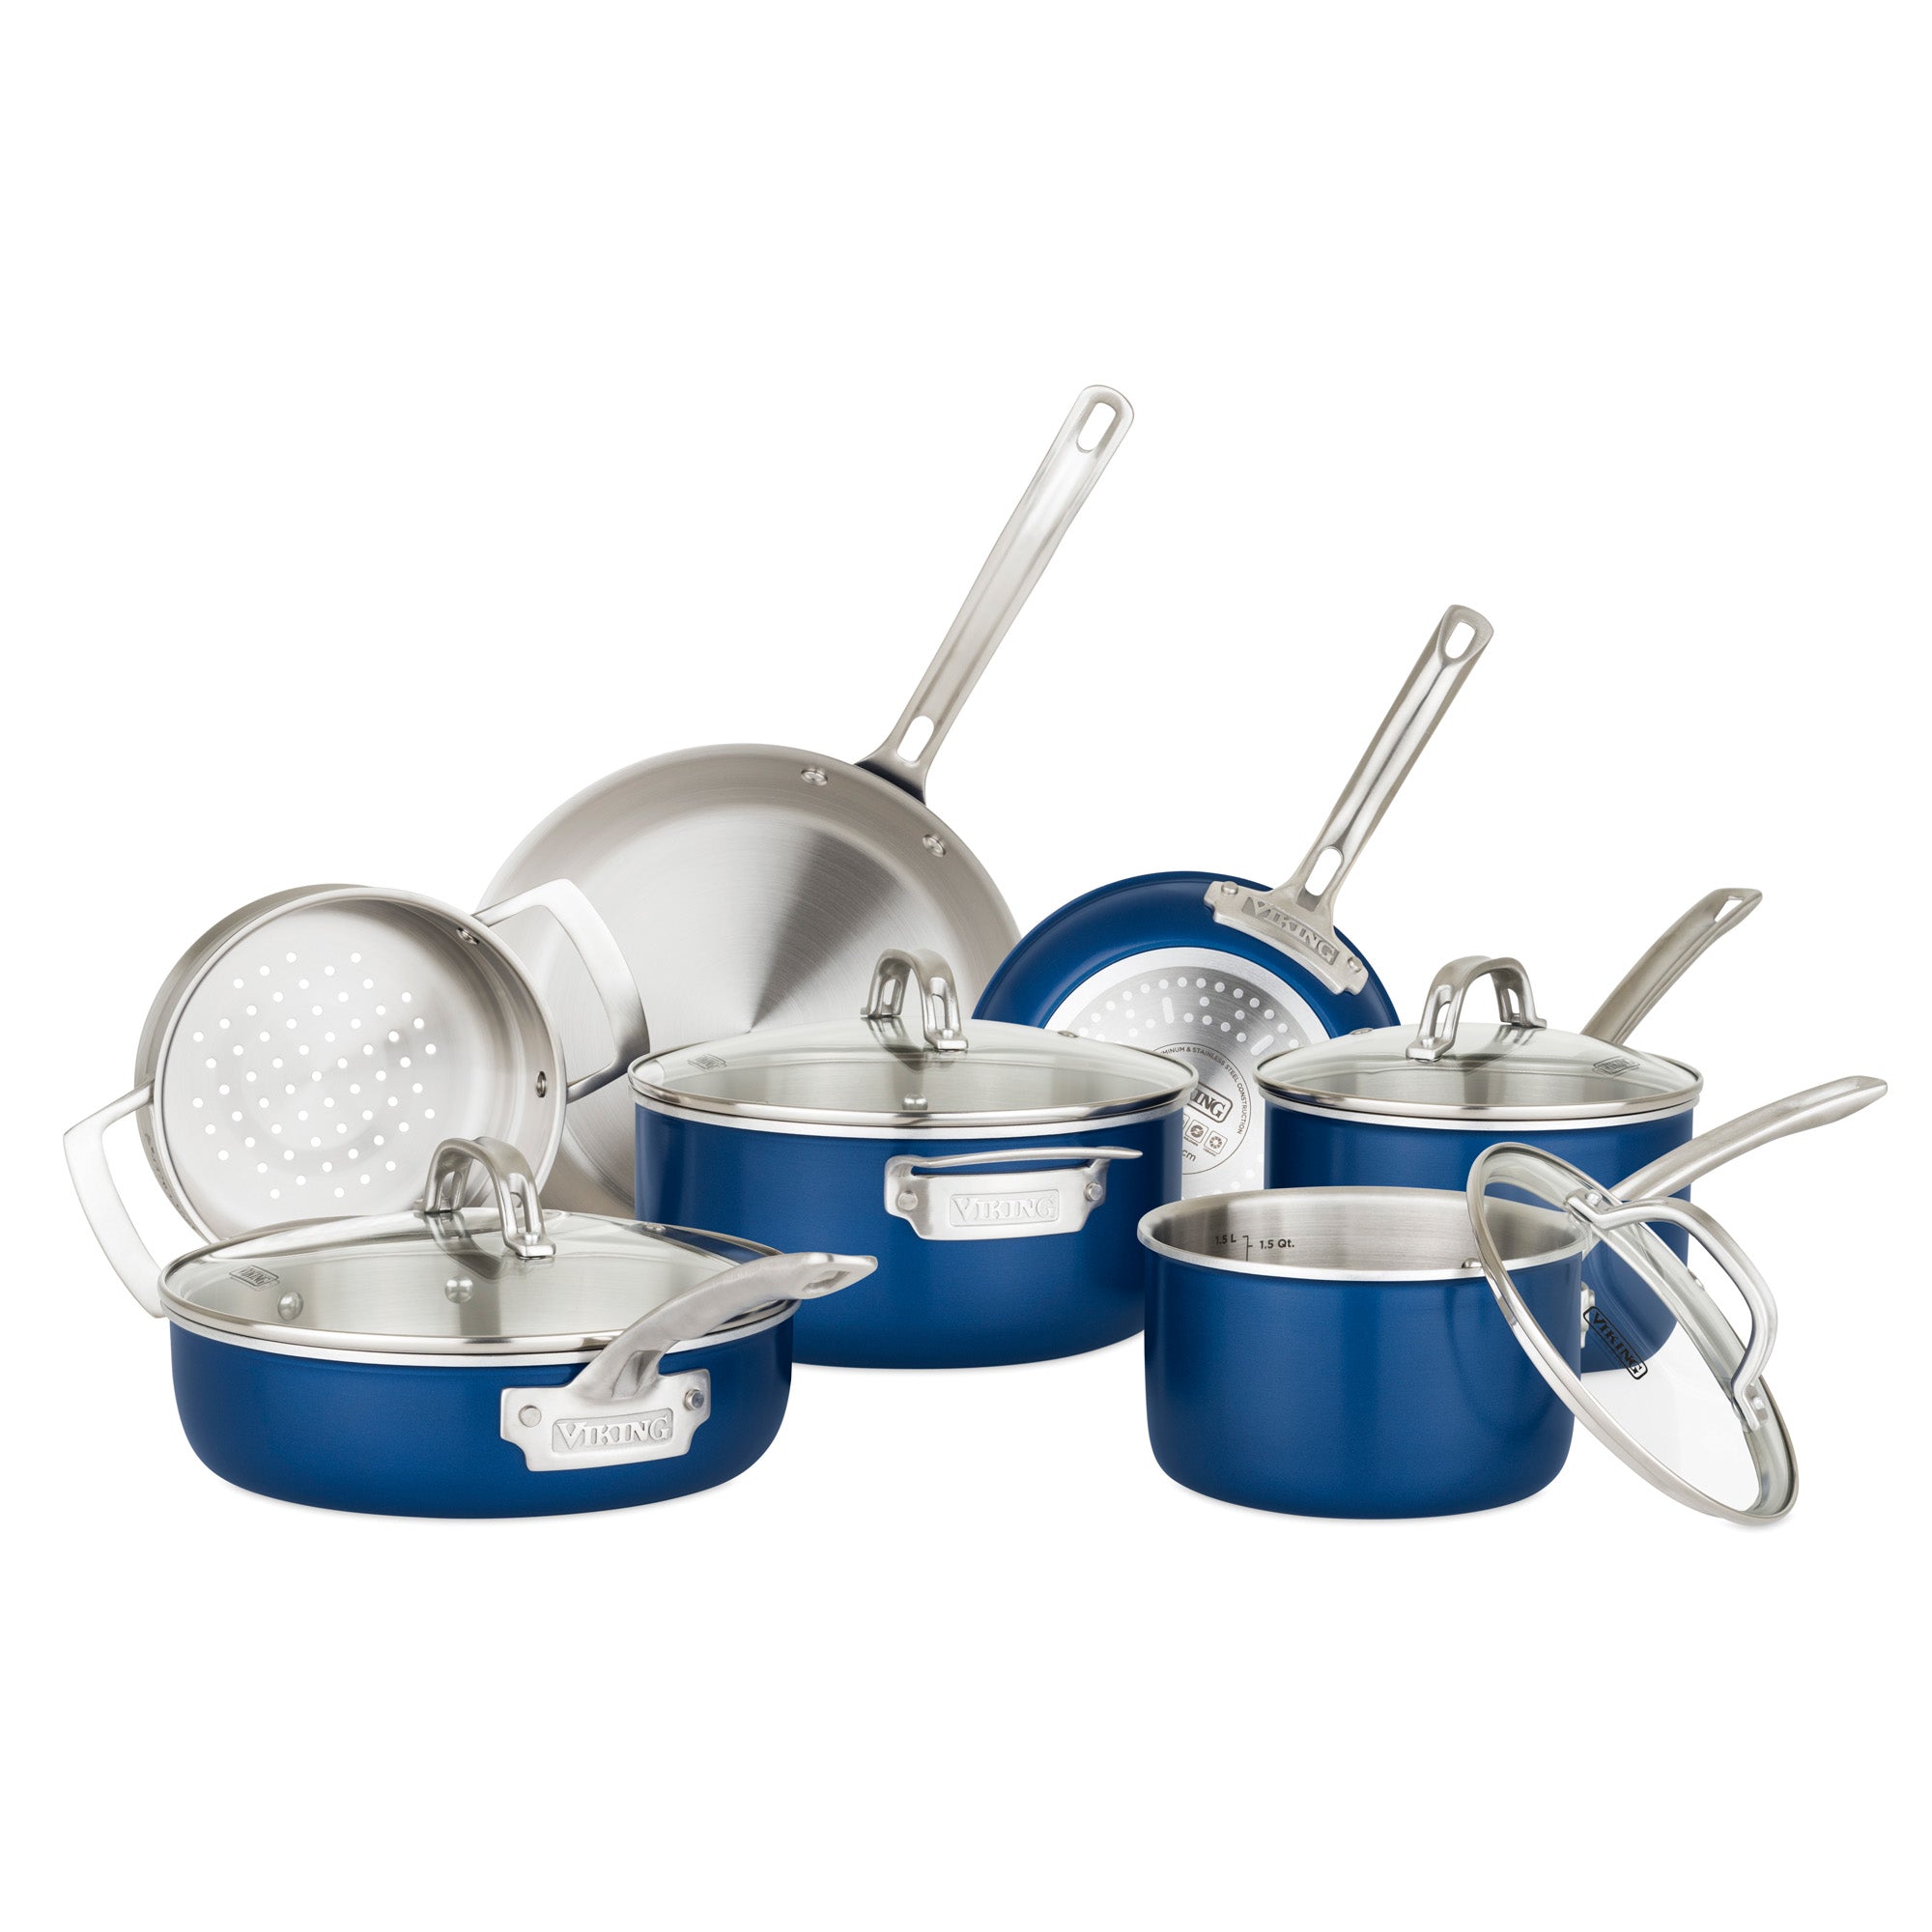 11 Pieces Stainless Steel Kitchen Cookware Set with Gold Stay-Cool